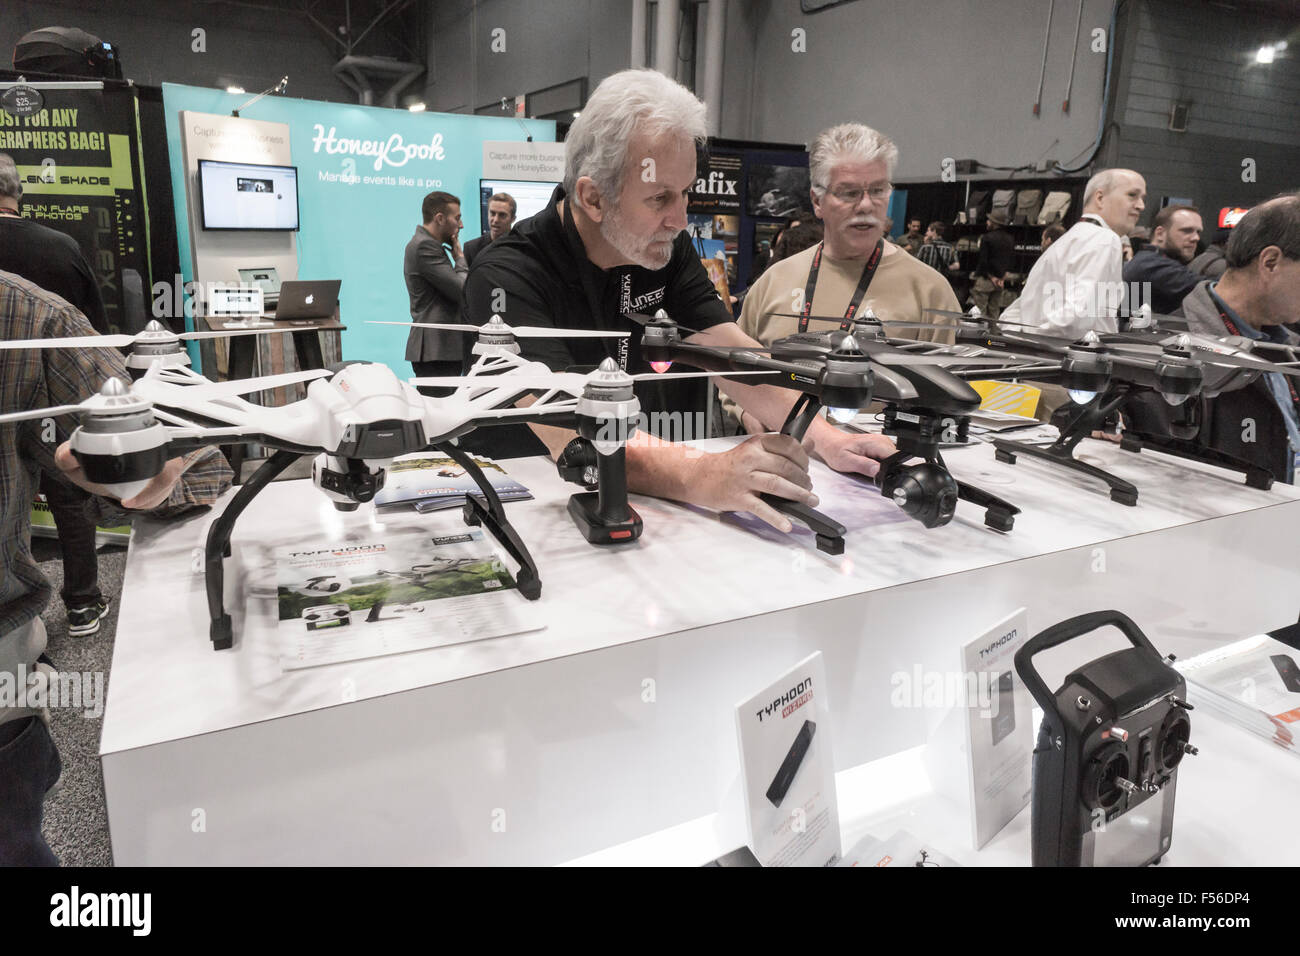 Commercial drones are displayed at a trade show in New York on Friday, October 23, 2015.  The US Dept. of Transportation has convened a task force to recommend parameters for drone registration, with a time frame that the regulations will be ready for Christmas. (© Richard B. Levine) Stock Photo